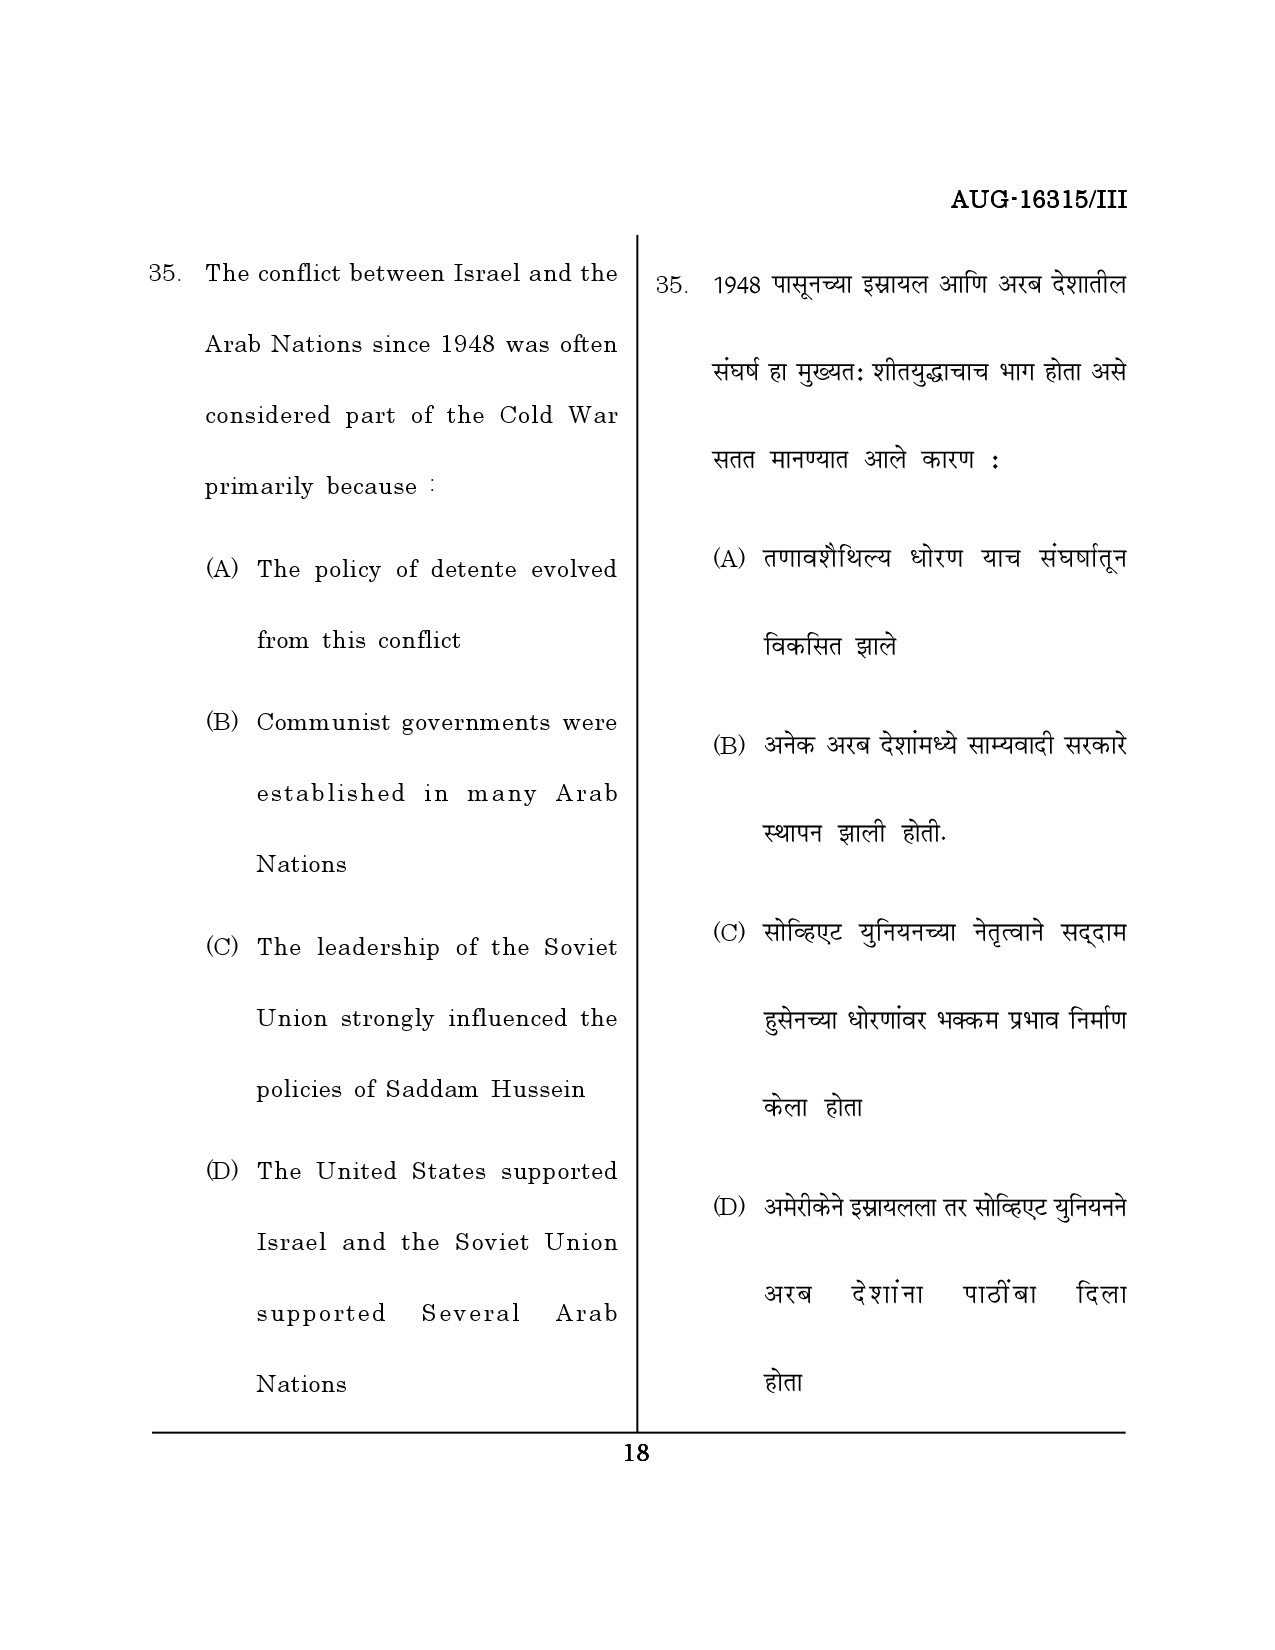 Maharashtra SET Defence and Strategic Studies Question Paper III August 2015 17